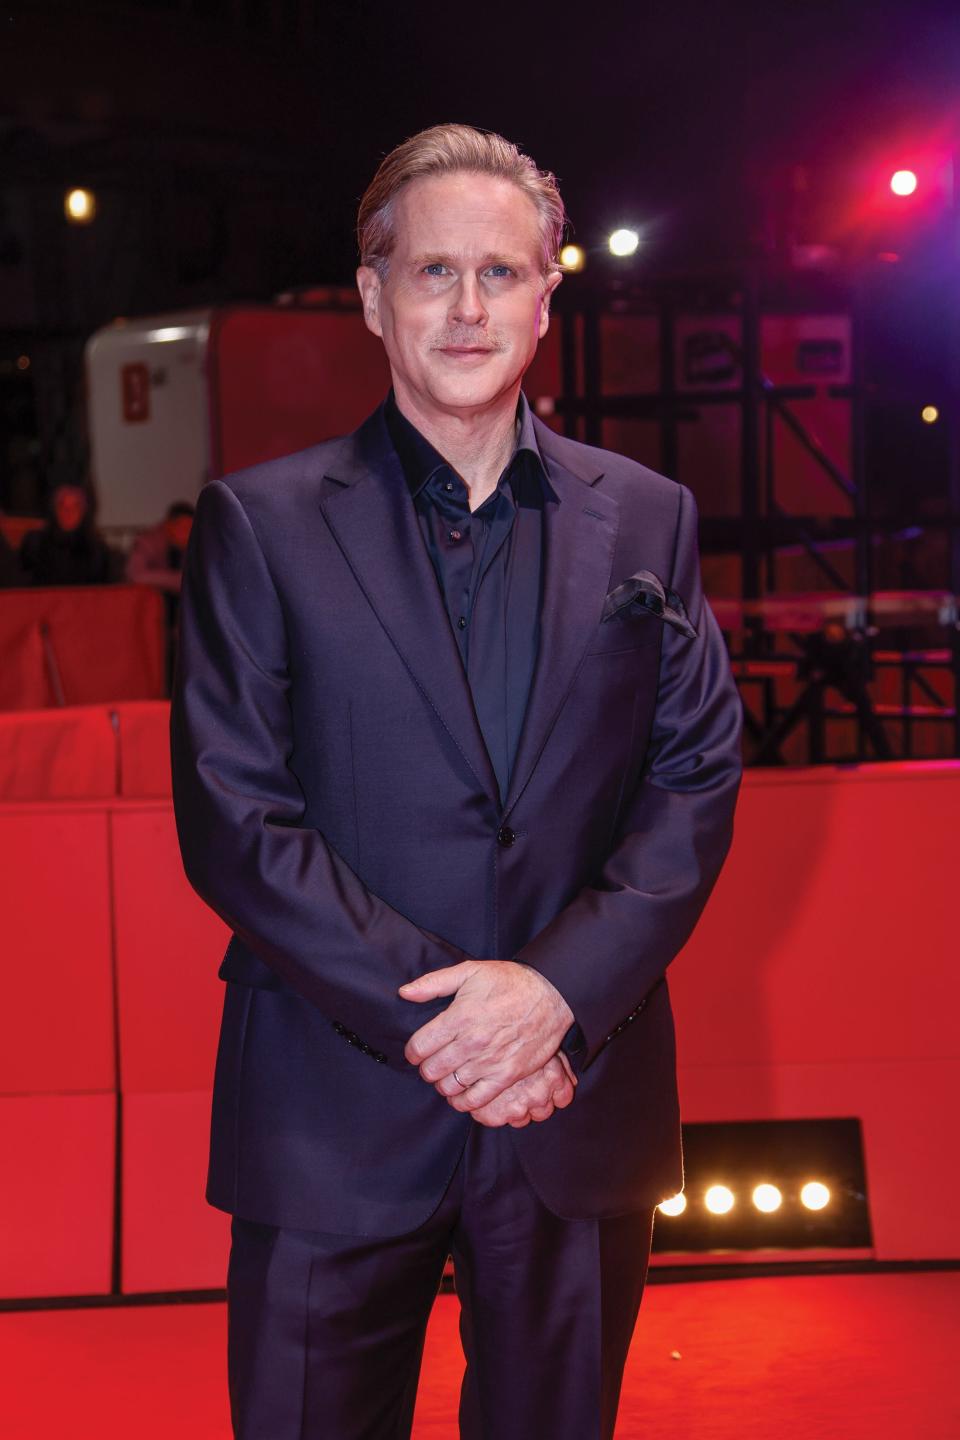 The Cinema Columbus Film Festival will host "The Princess Bride" star Cary Elwes on April 29. After the film, Elwes will hold a Q&A and share behind-the-scenes stories about life on and off the set.